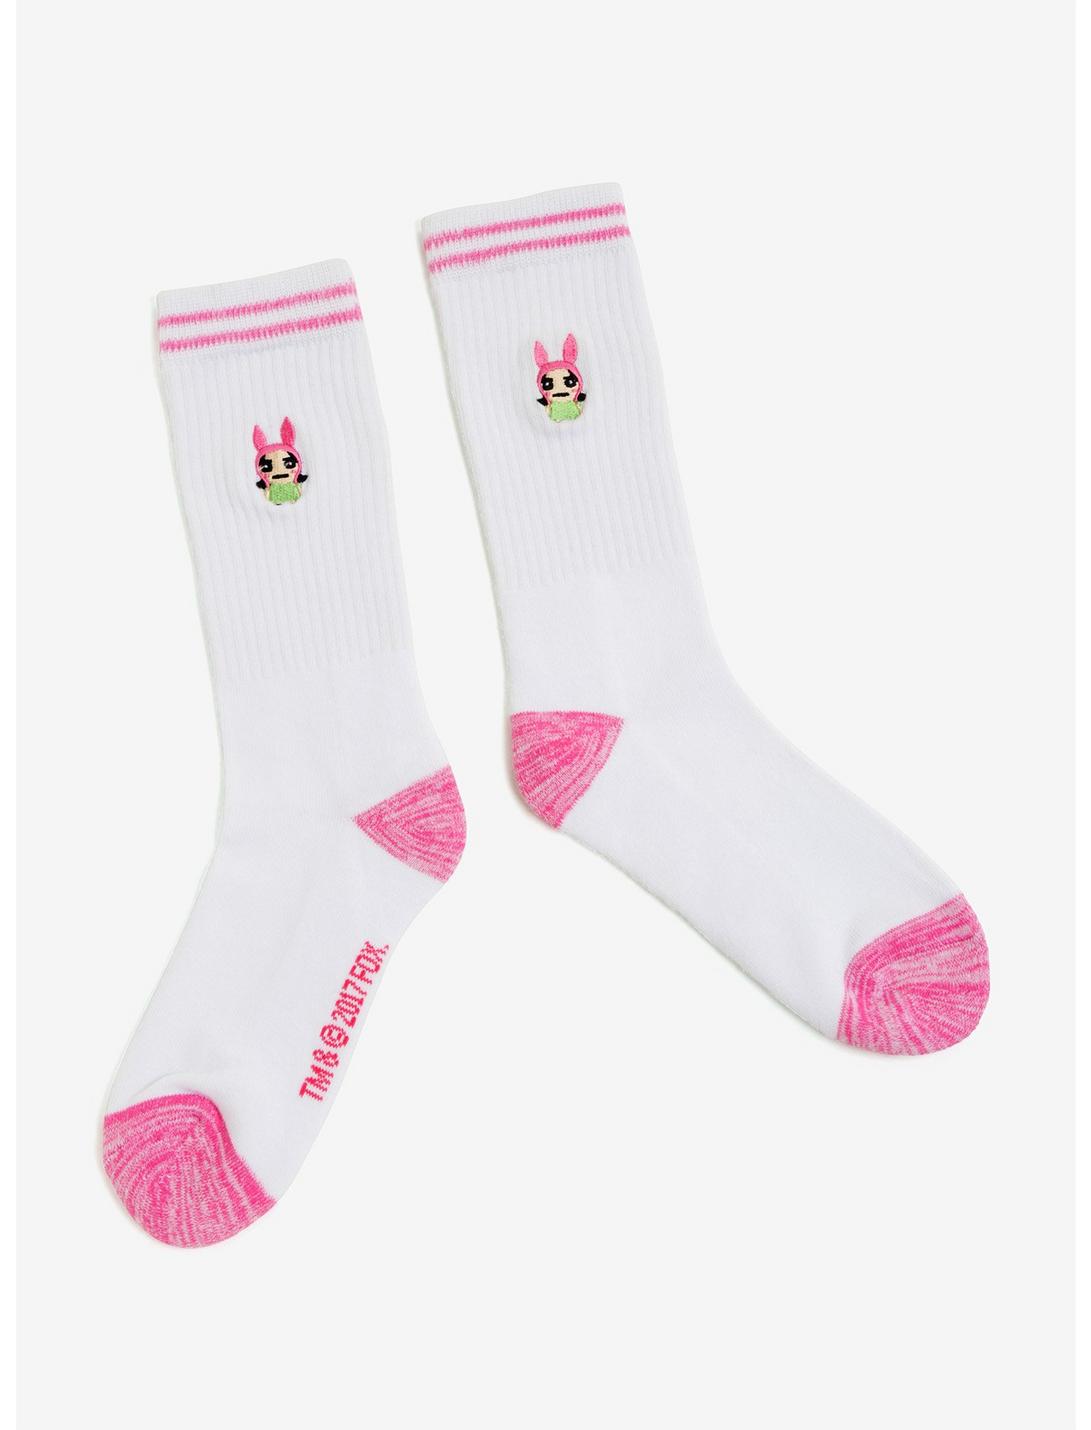 Bob's Burgers Louise Belcher Embroidered Socks | BoxLunch